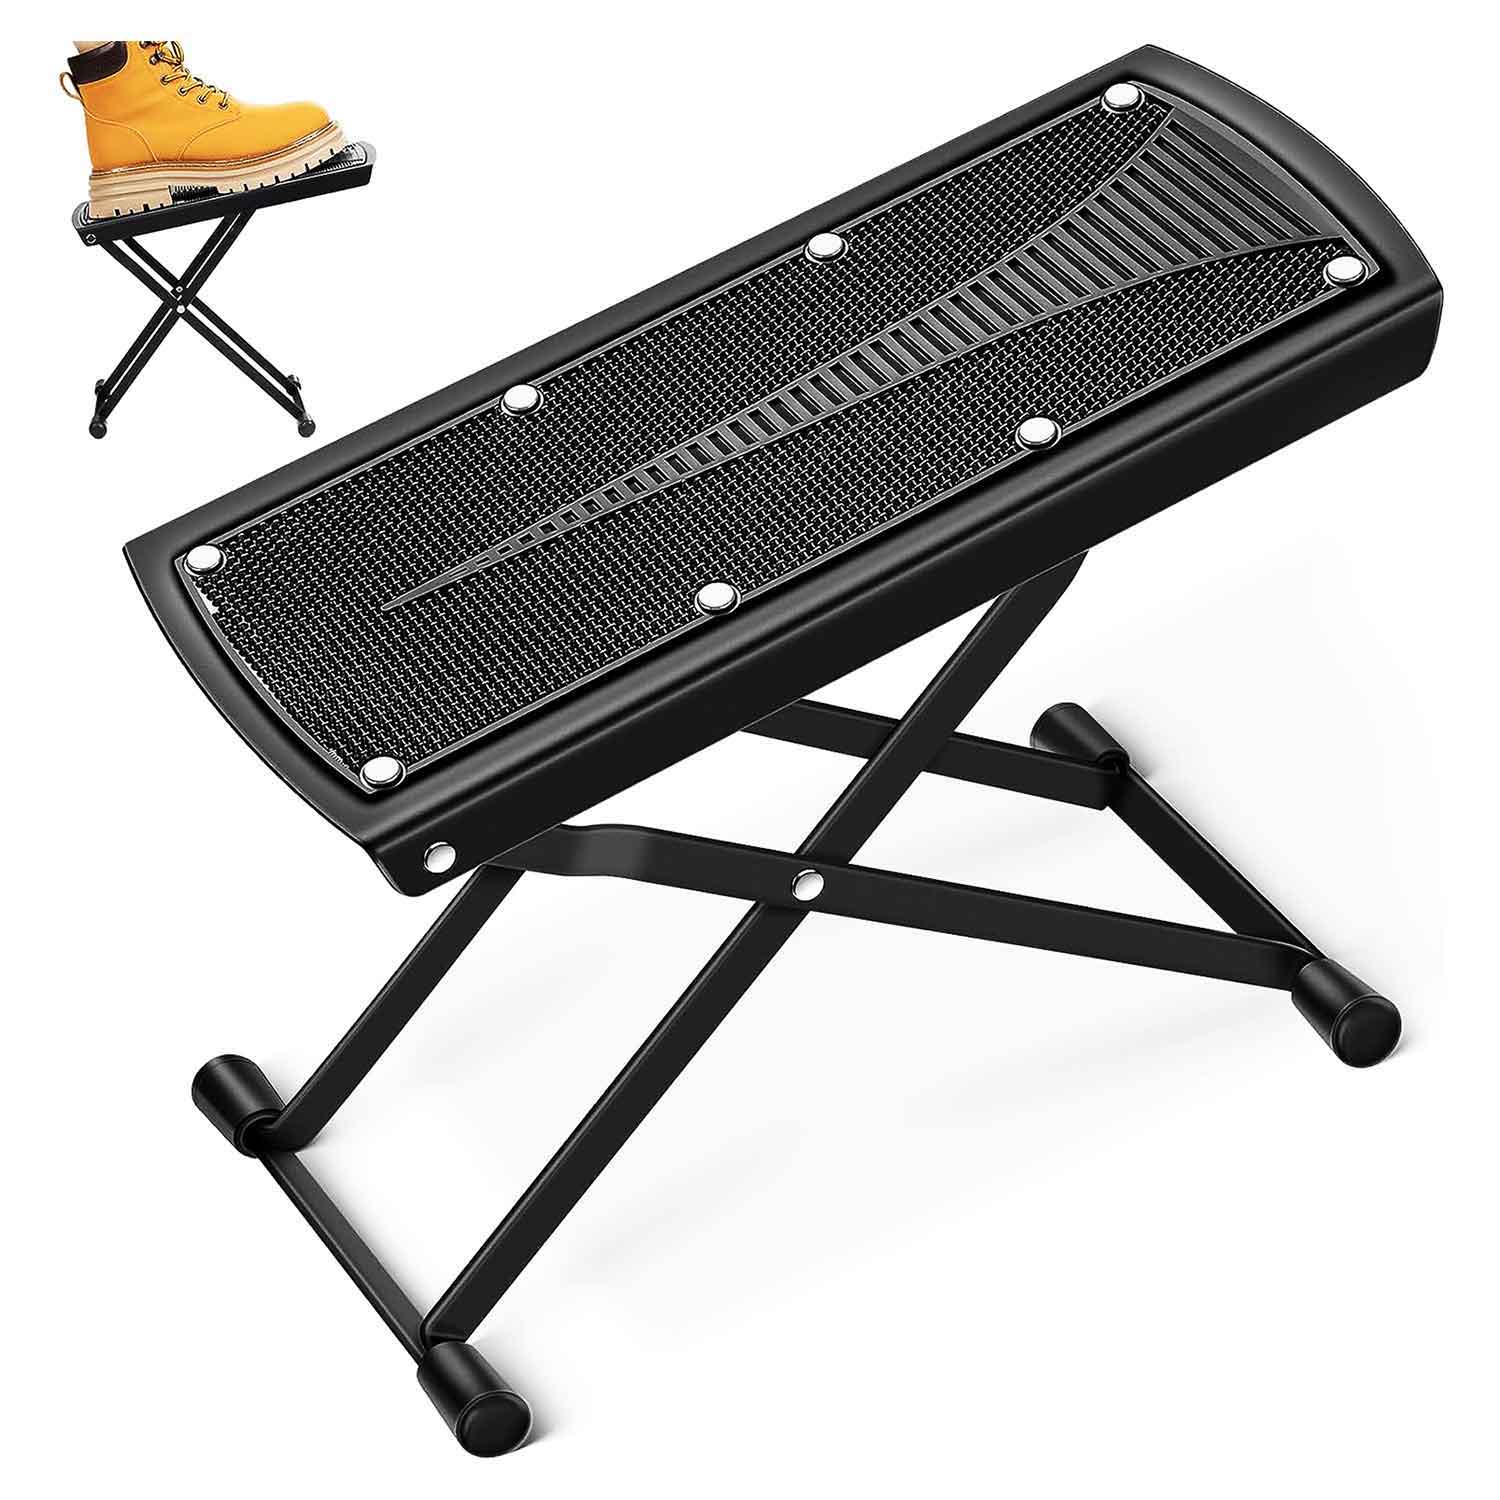 5 Core Guitar Foot Stool 6 Level Height Adjustable Leg Rest Rubber Pad Stable Foot Stand Black